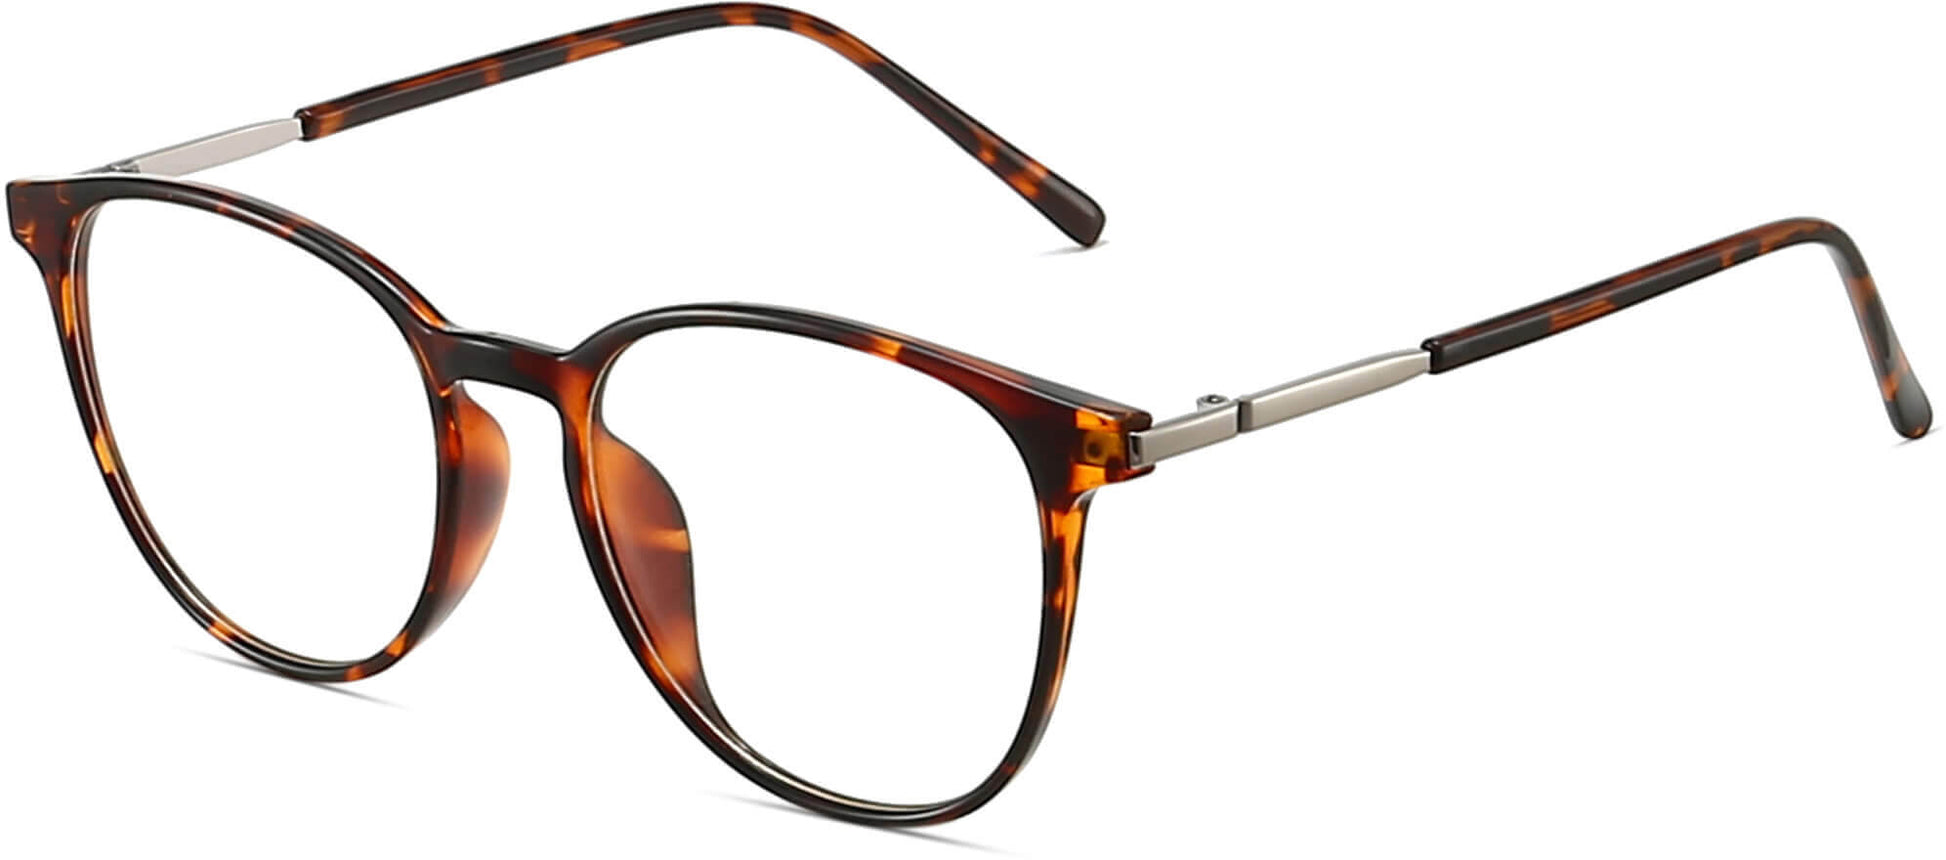 Clementine Round Tortoise Eyeglasses from ANRRI, angle view